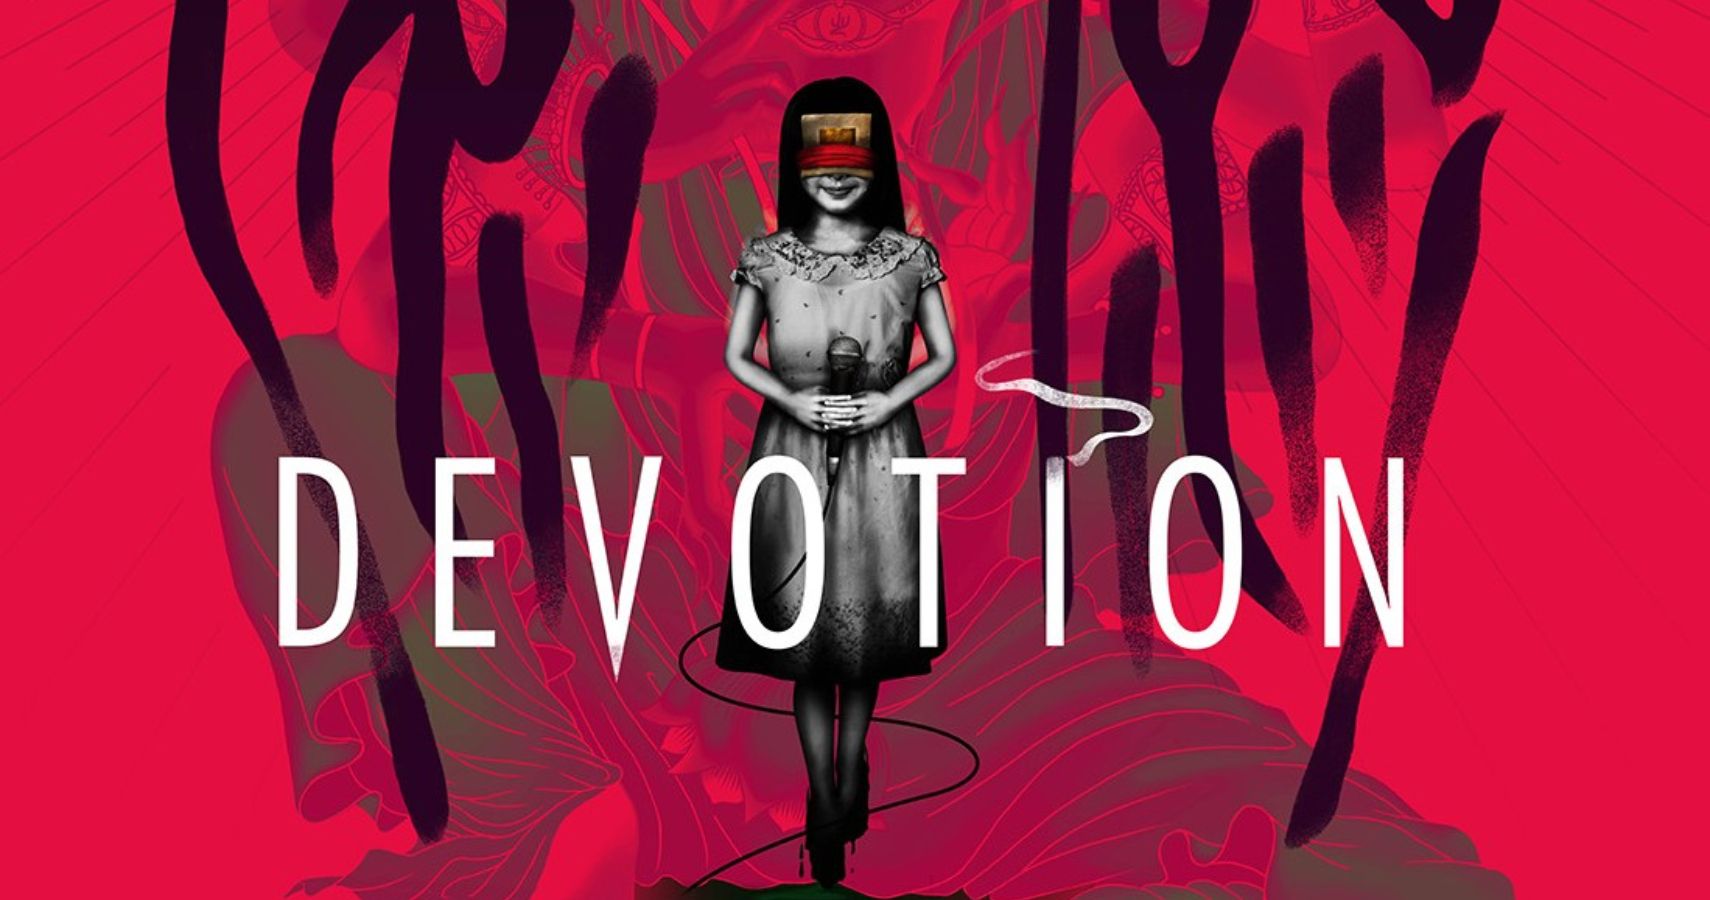 Devotion Is Now Back On Sale On Red Candle Games EShop